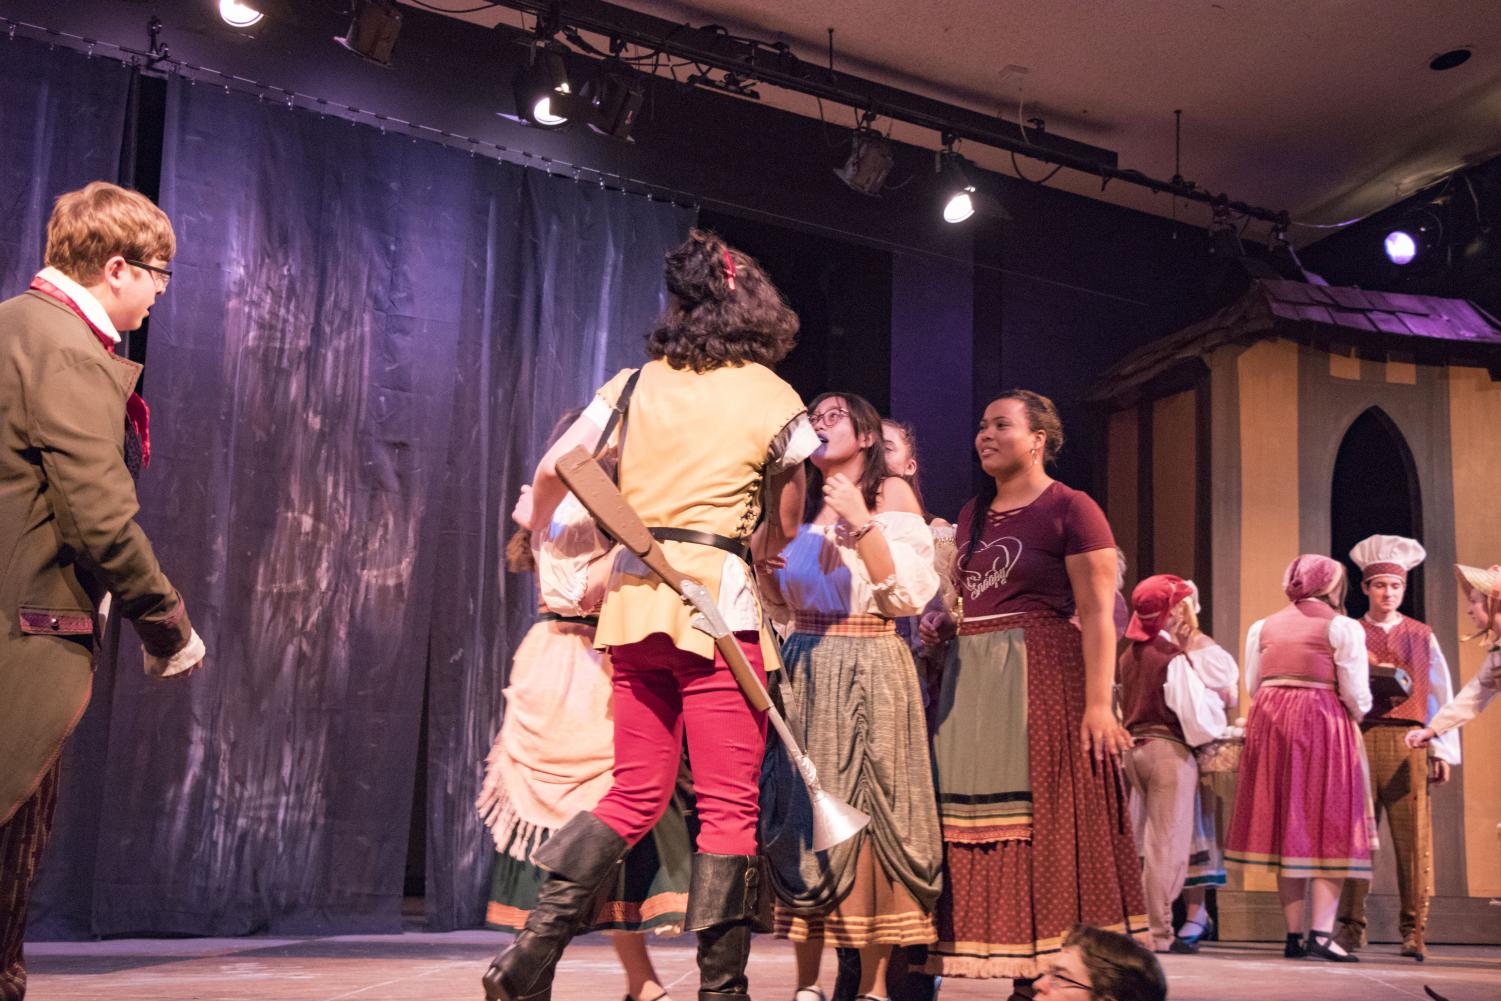 Empathy, Magic, and True Love: “Beauty and the Beast” Comes to La Salle ...